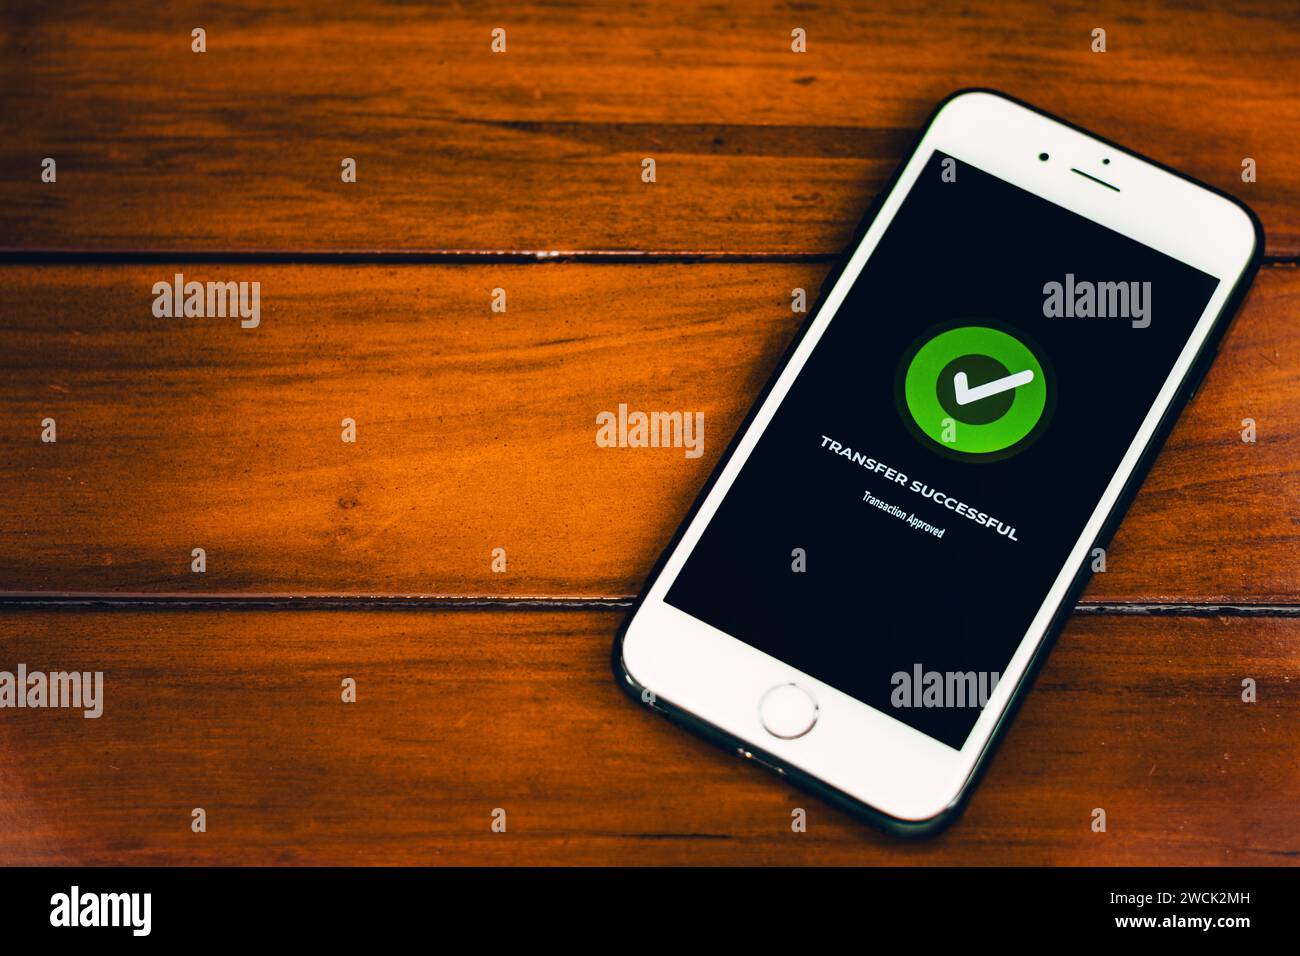 Money Transfers. Online payment. Smartphone with successful payment notification on screen on wooden background Stock Photo